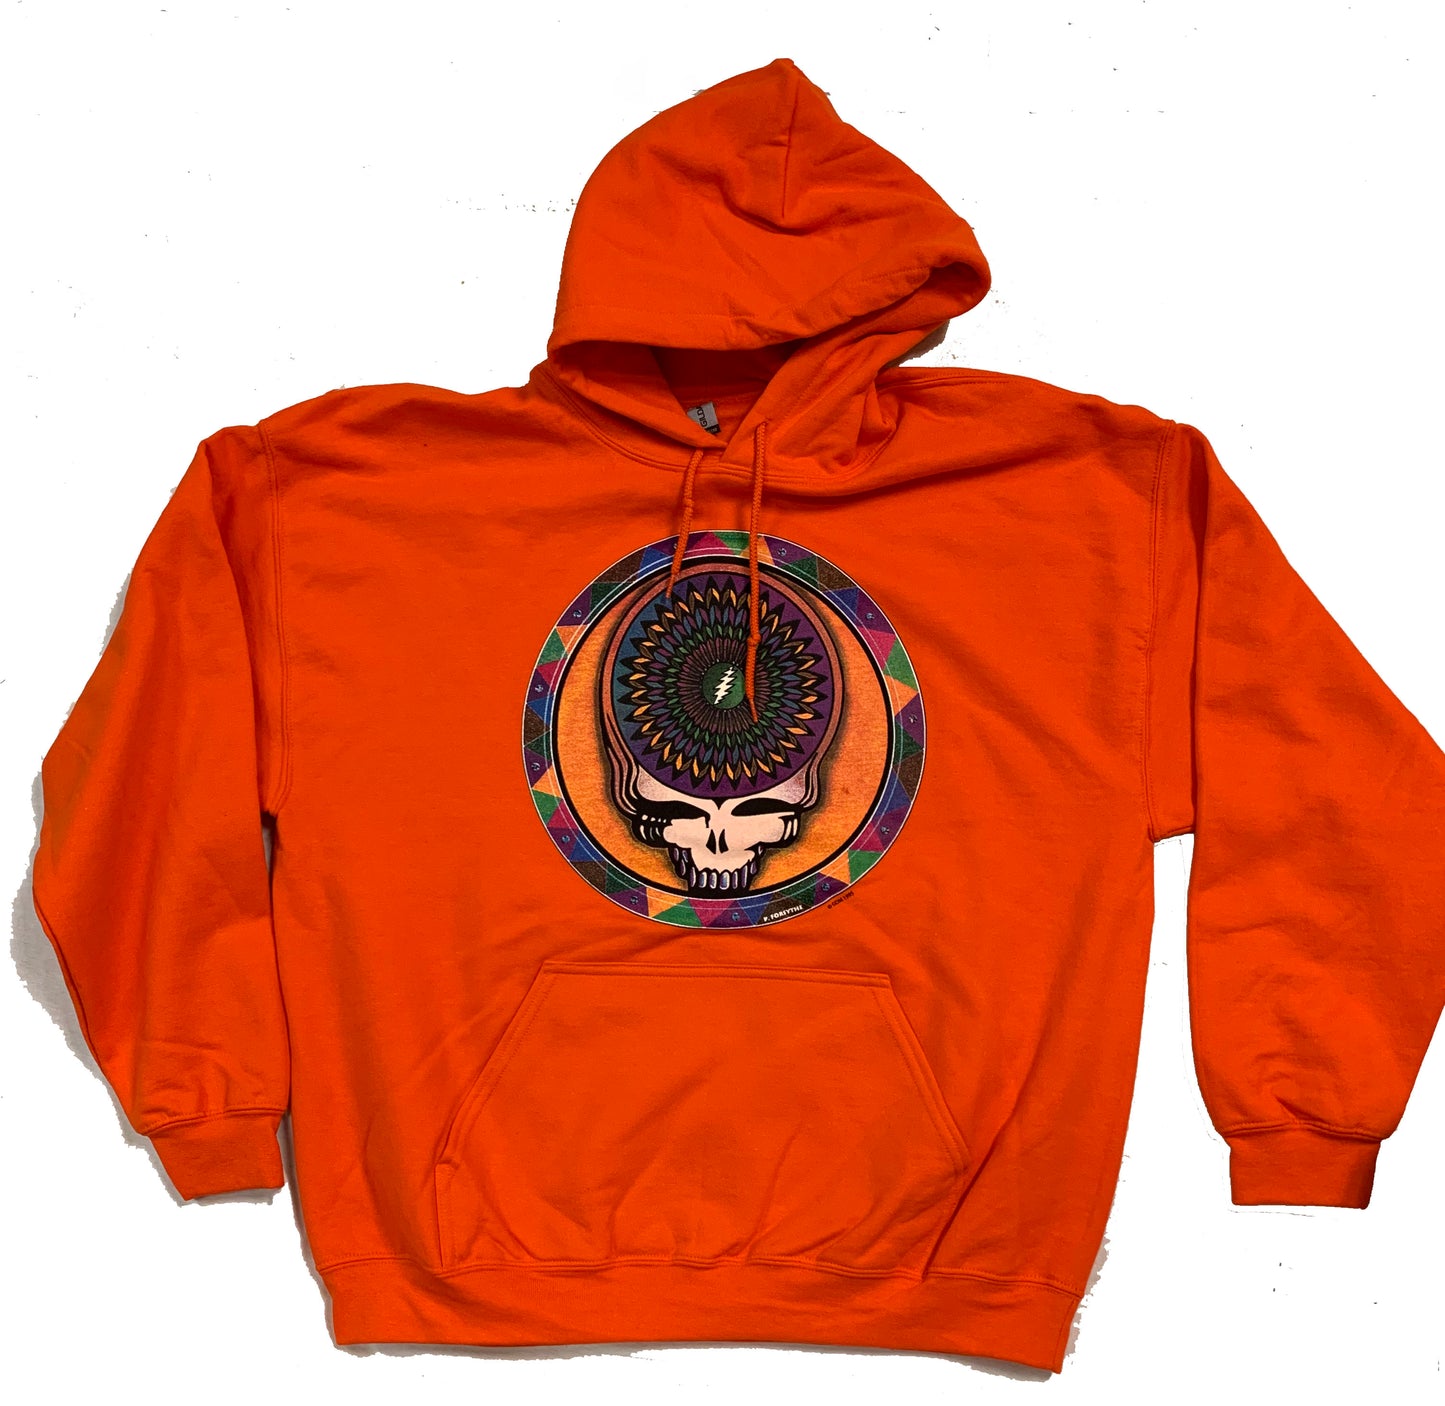 Steal Your Feathers Hoodie in Orange